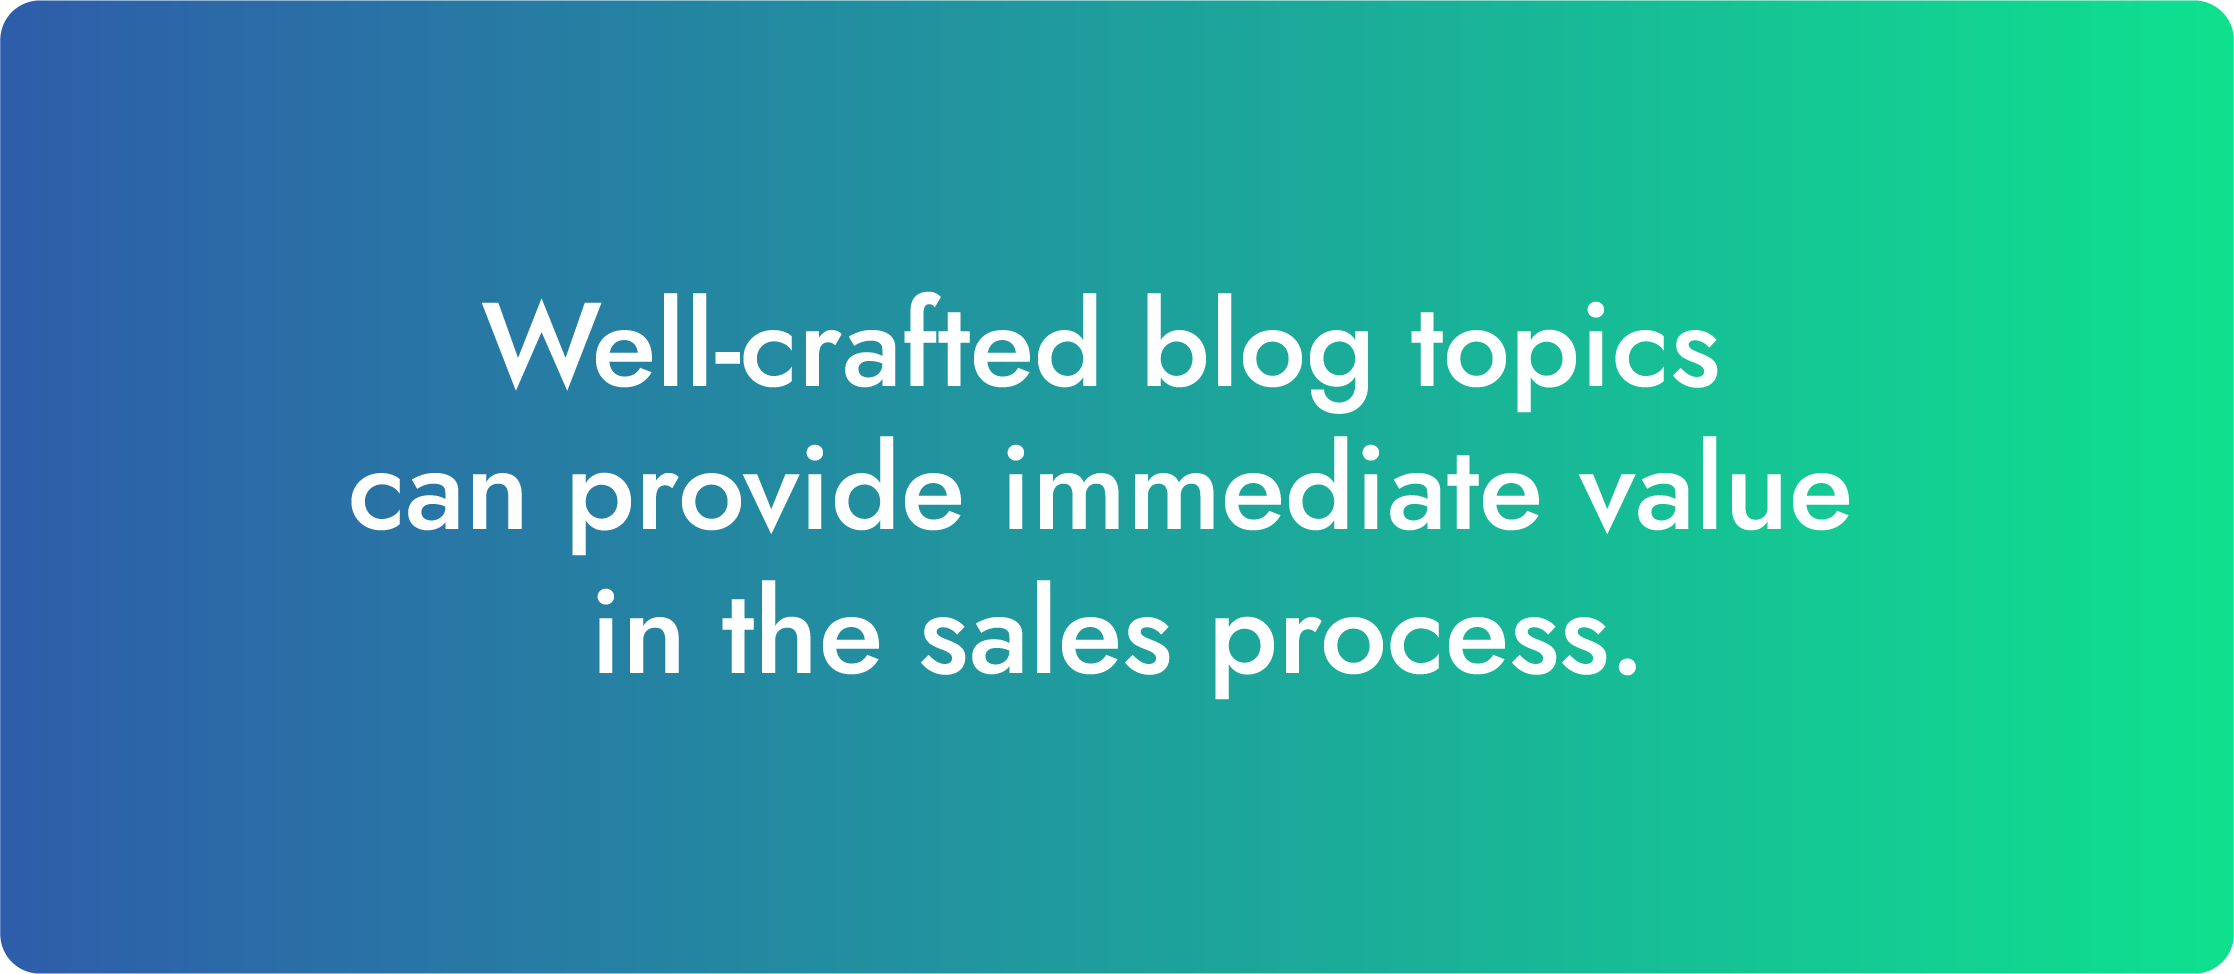 Well-crafted blog topics can provide immediate value in the sales process.